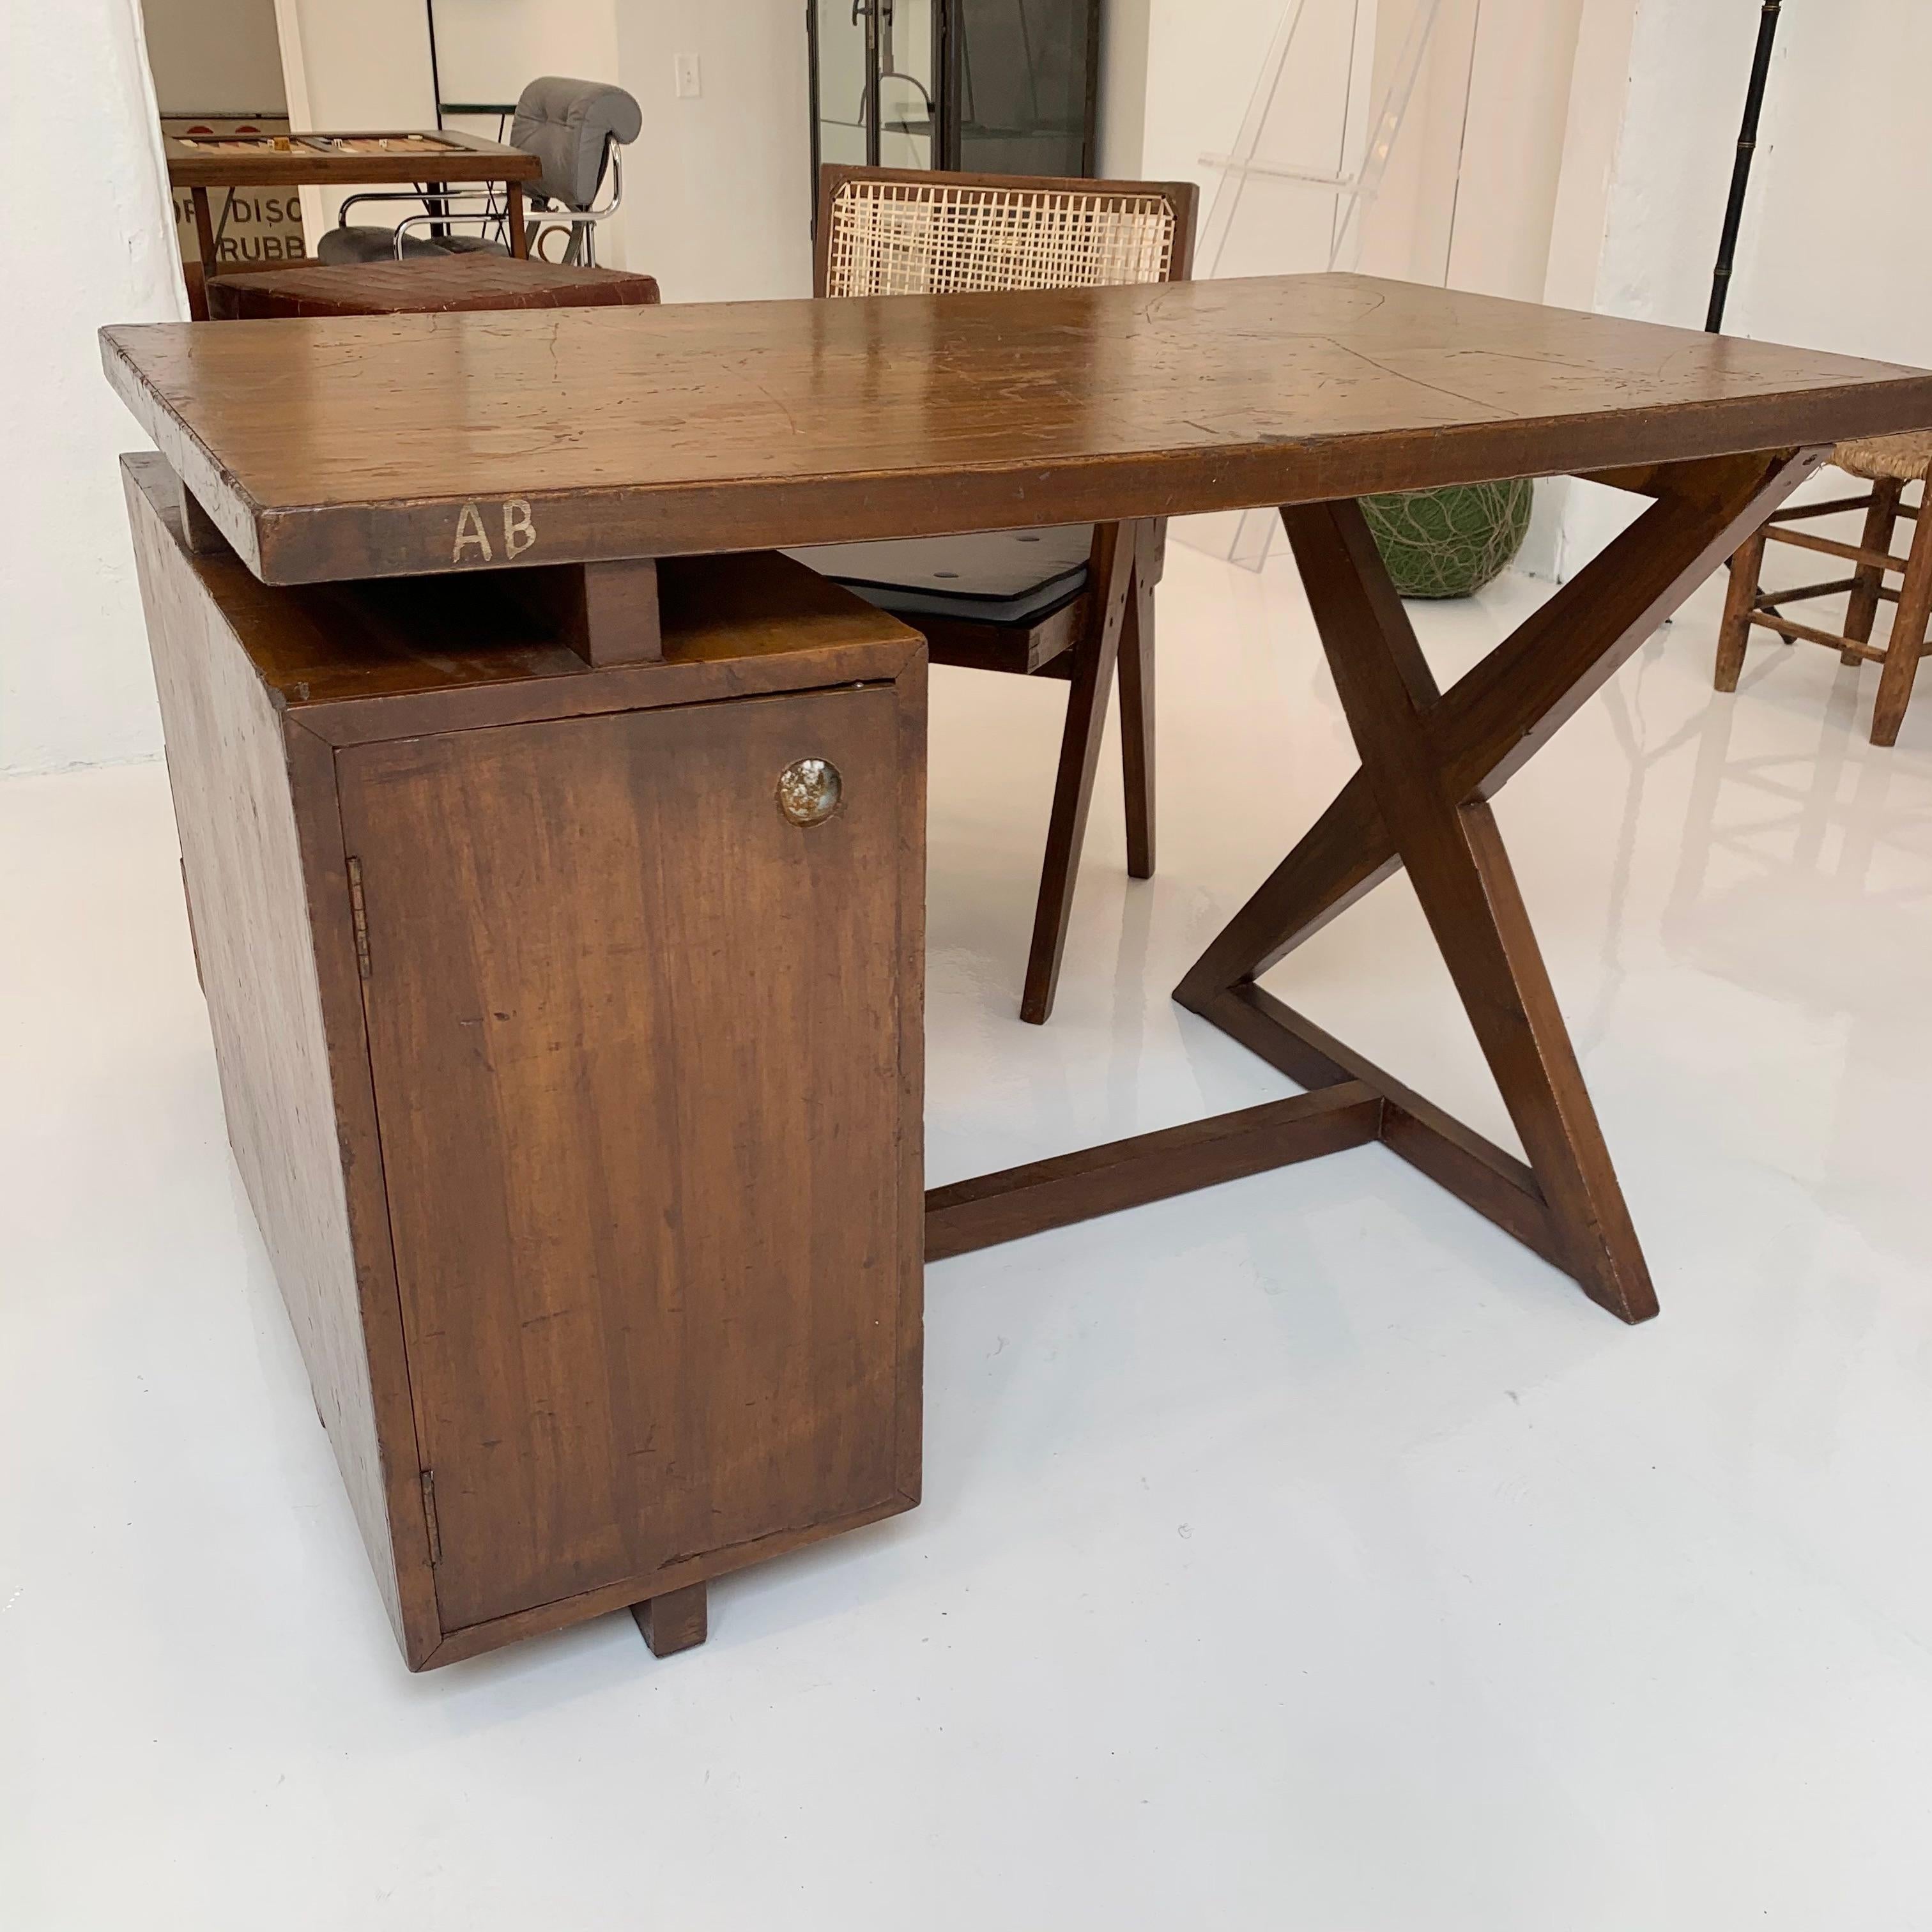 Indian Pierre Jeanneret Desk and Chair